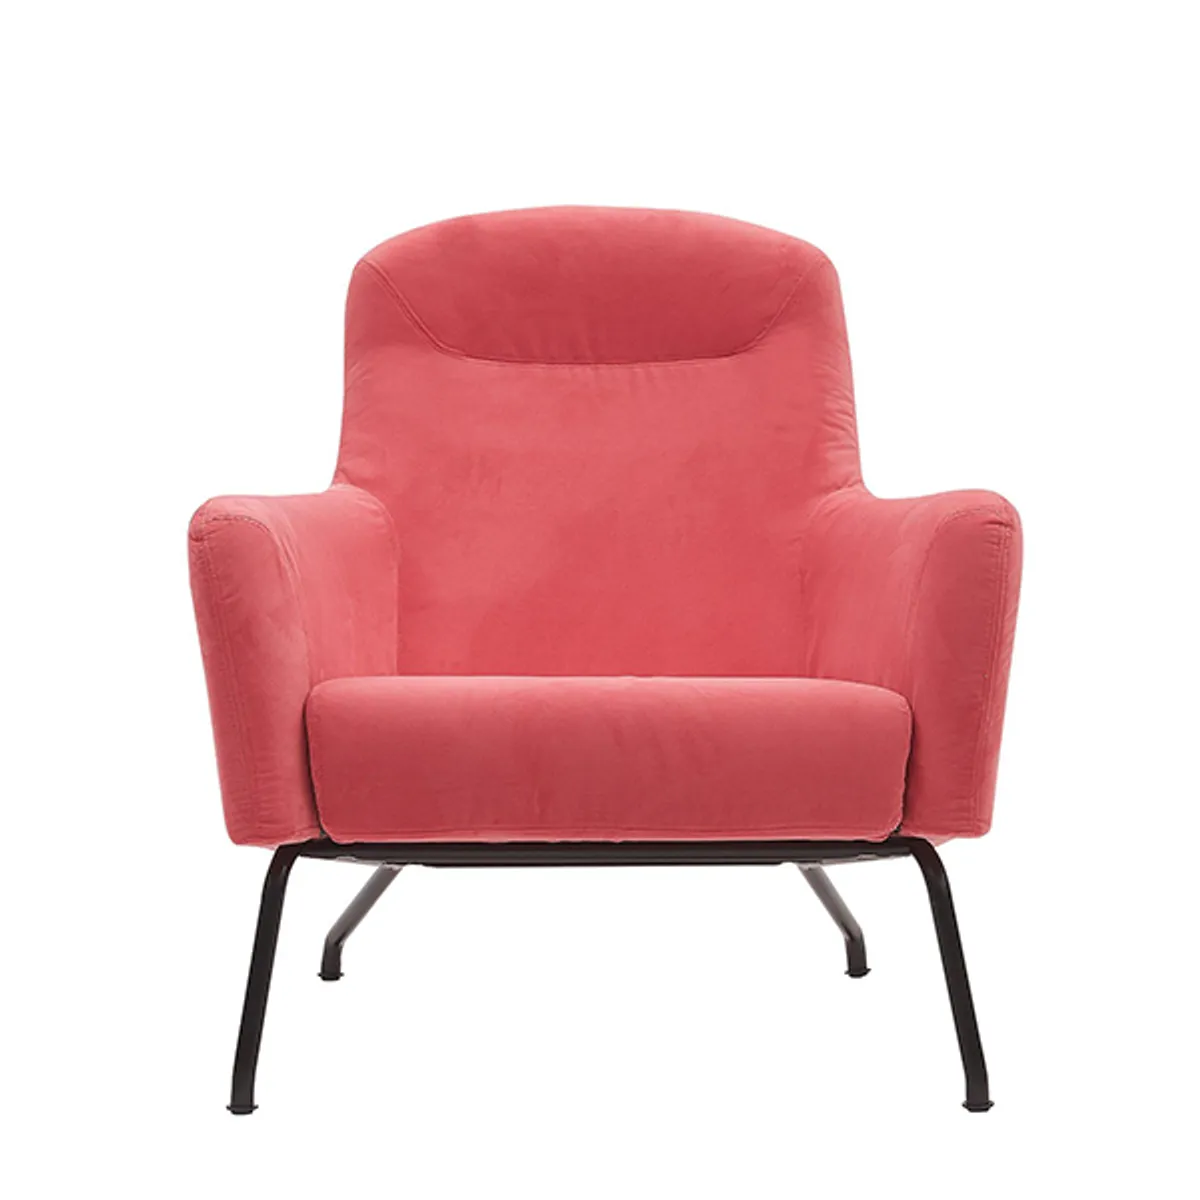 Inside-Out-Tonic-LowLounge-pink-black